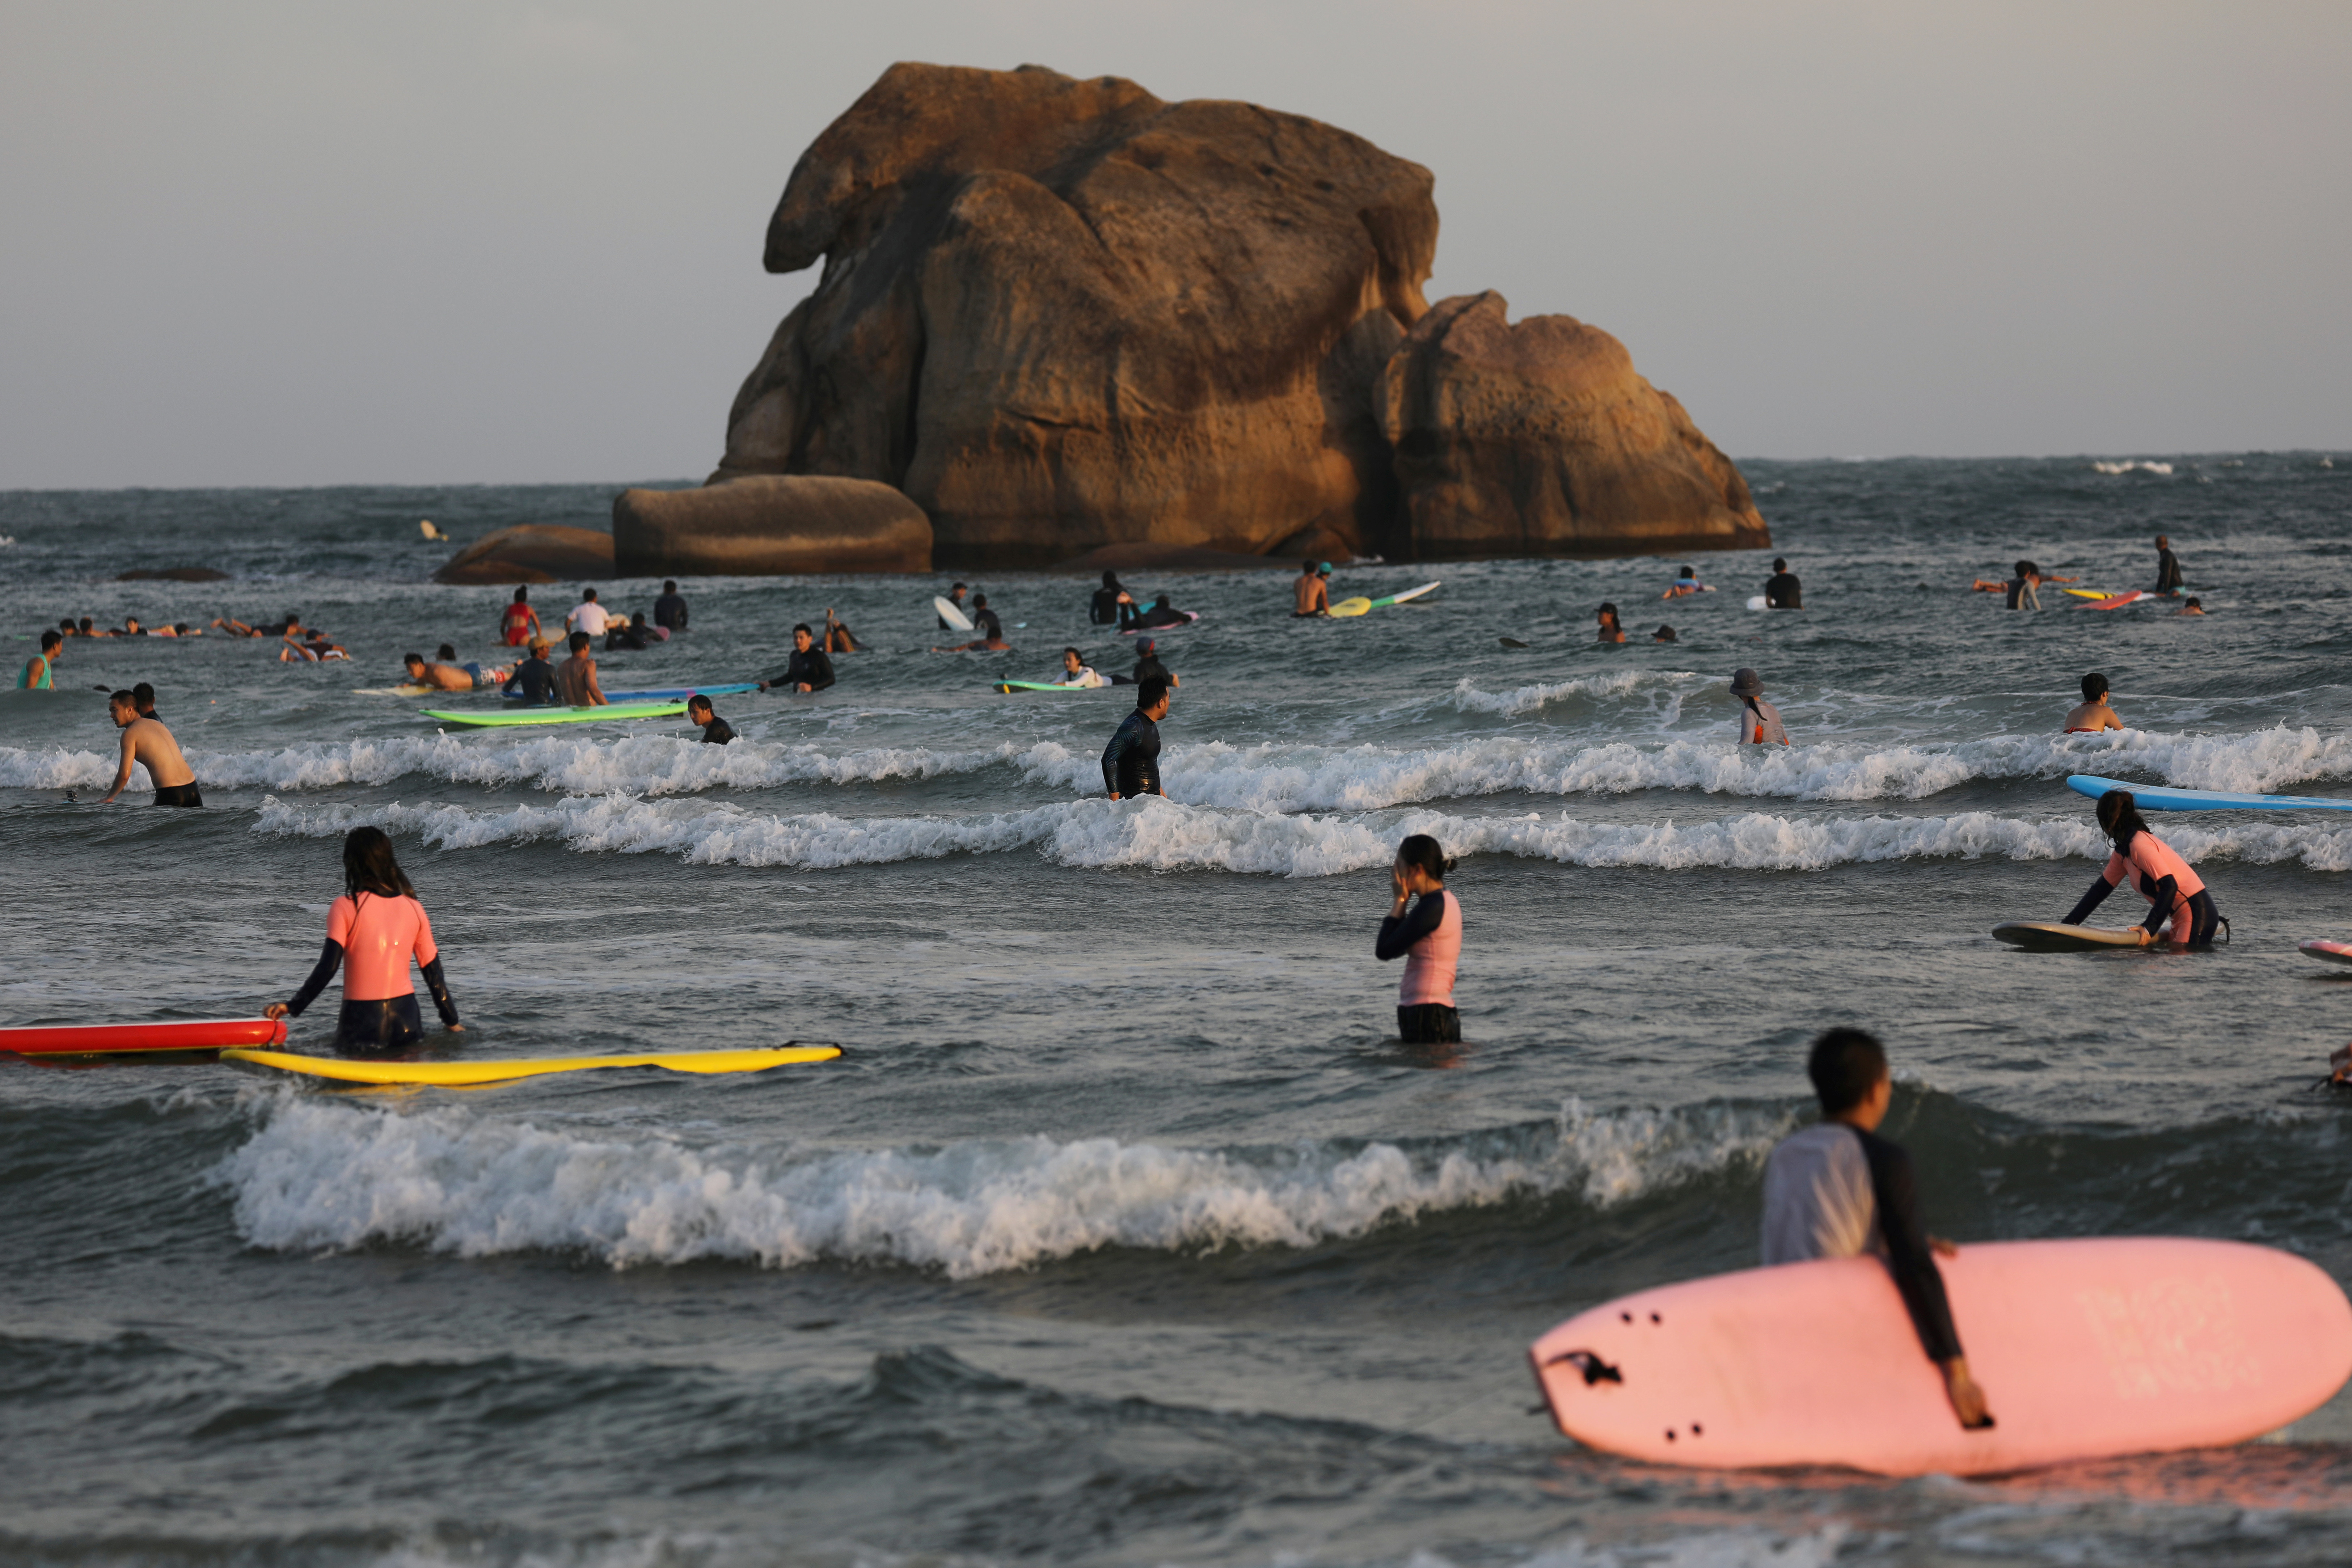 Surfers are seen in the sea in Sanya